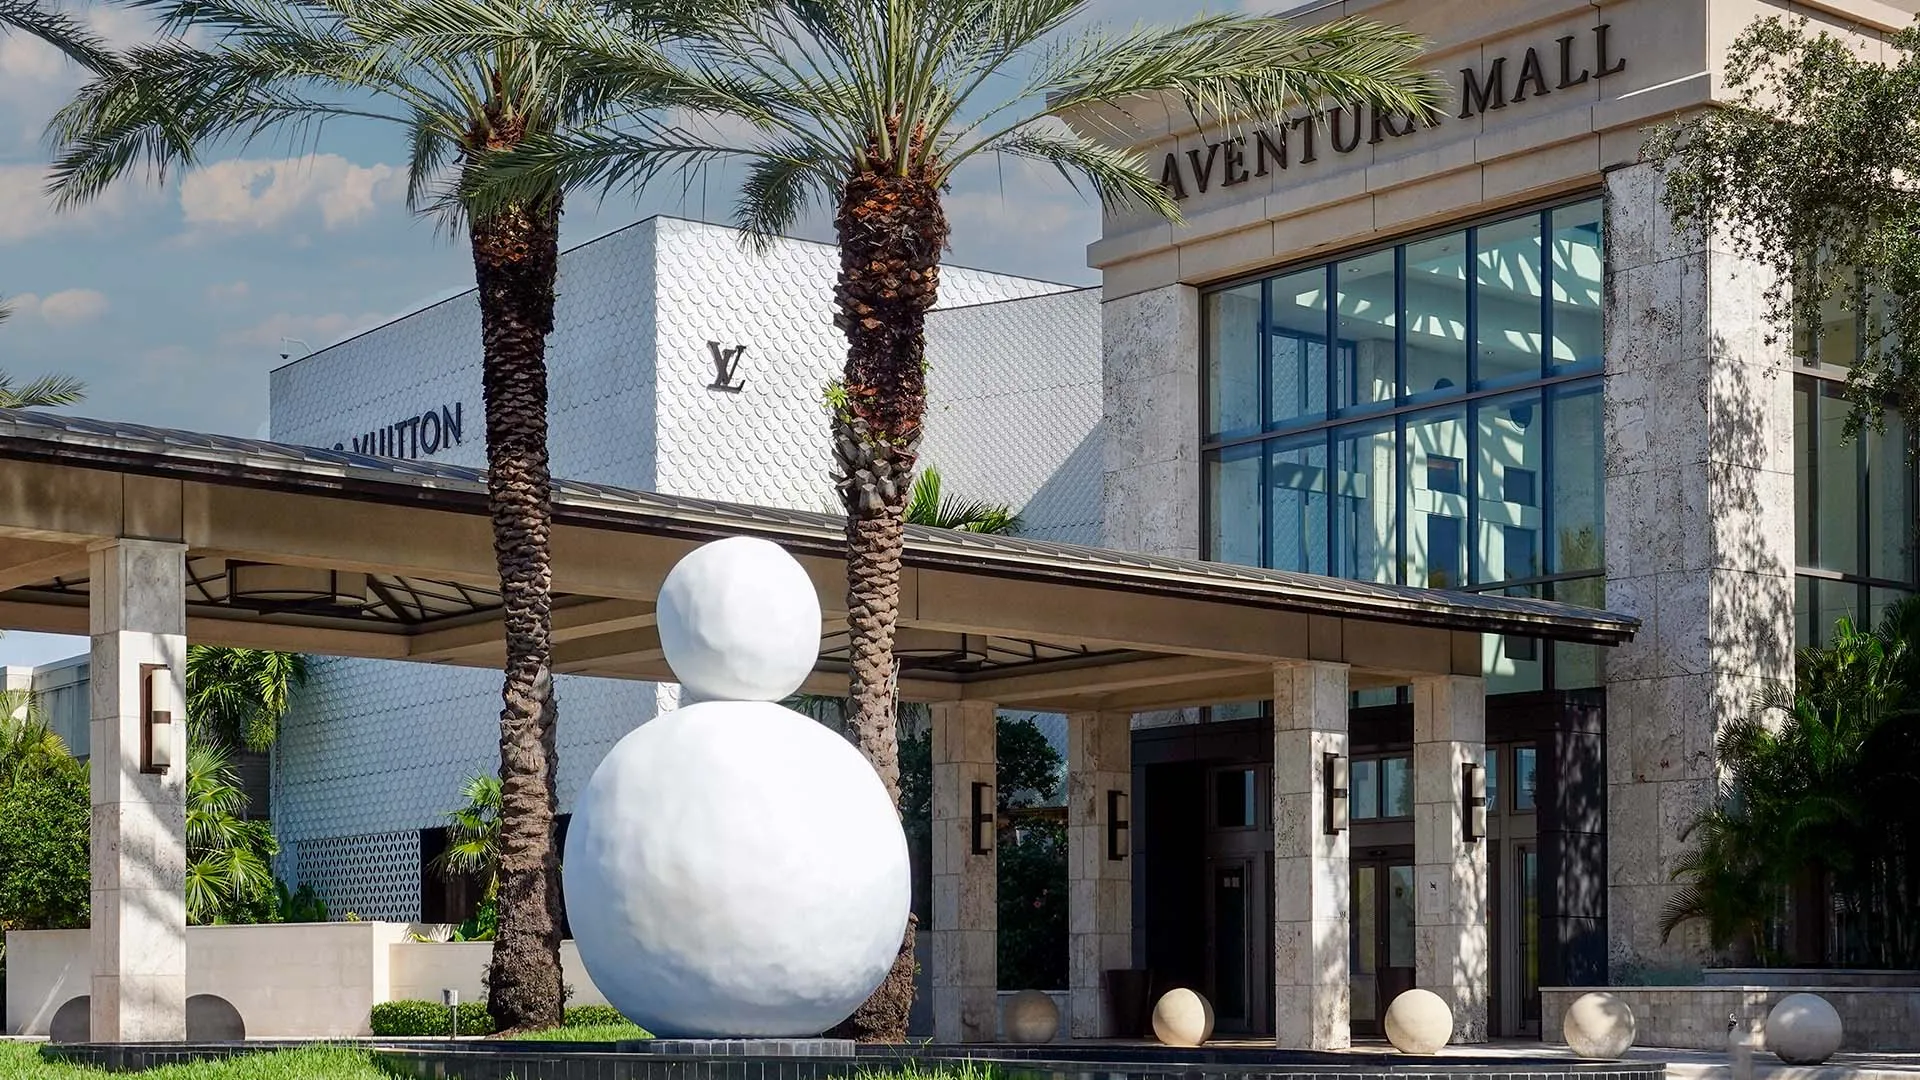 Aventura Mall in USA, north_america | Fragrance,Handbags,Shoes,Accessories,Clothes,Natural Beauty Products,Sportswear,Swimwear - Country Helper